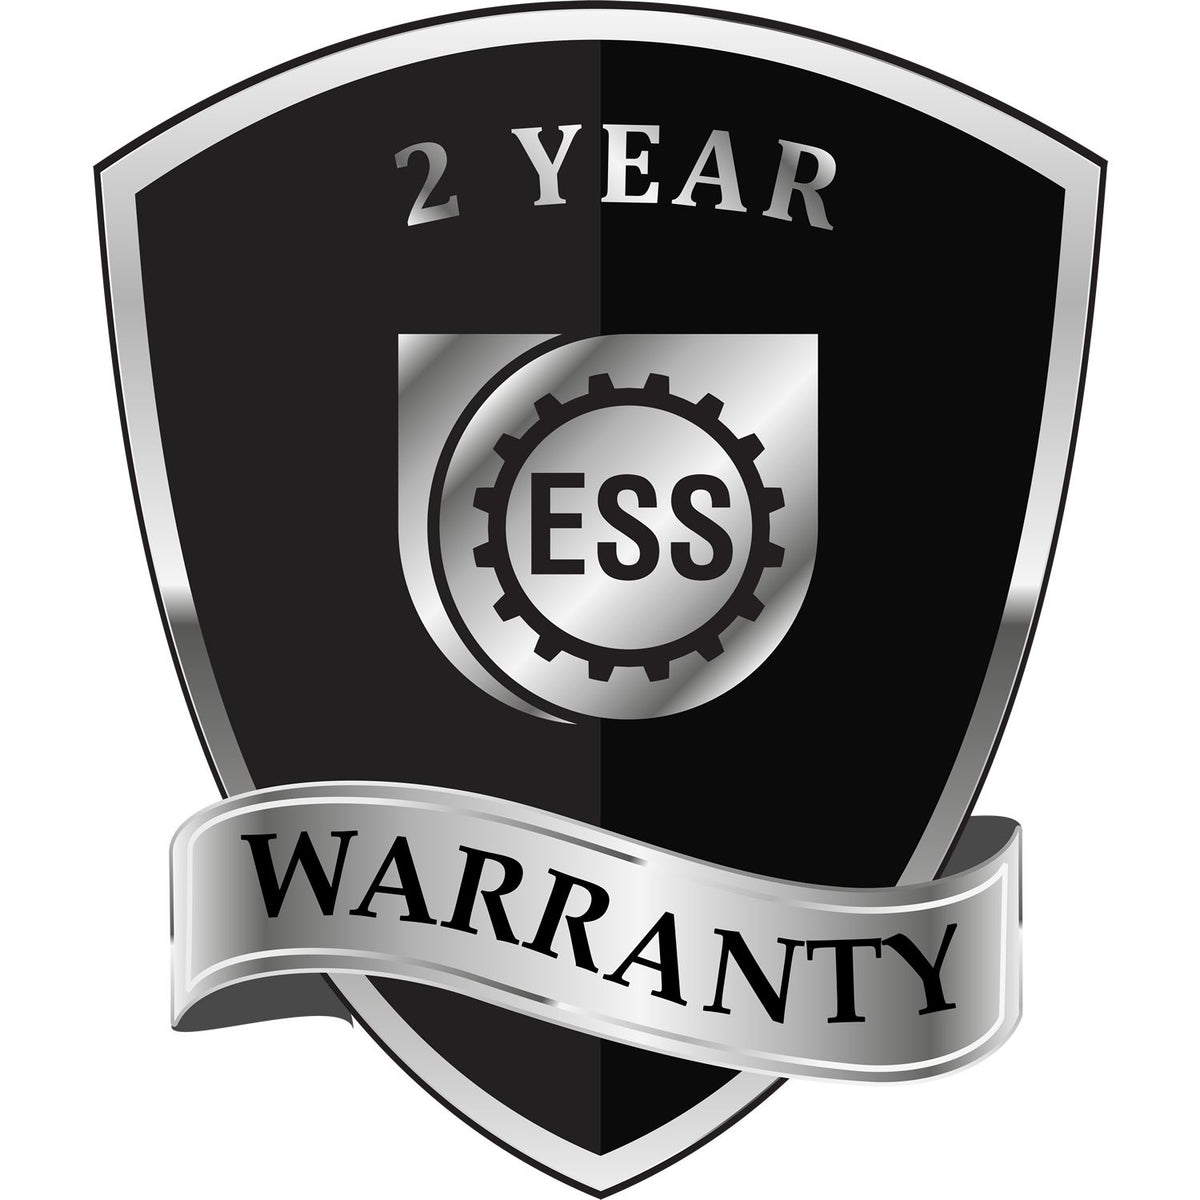 A badge or emblem showing a warranty icon for the State of Mississippi Extended Long Reach Engineer Seal